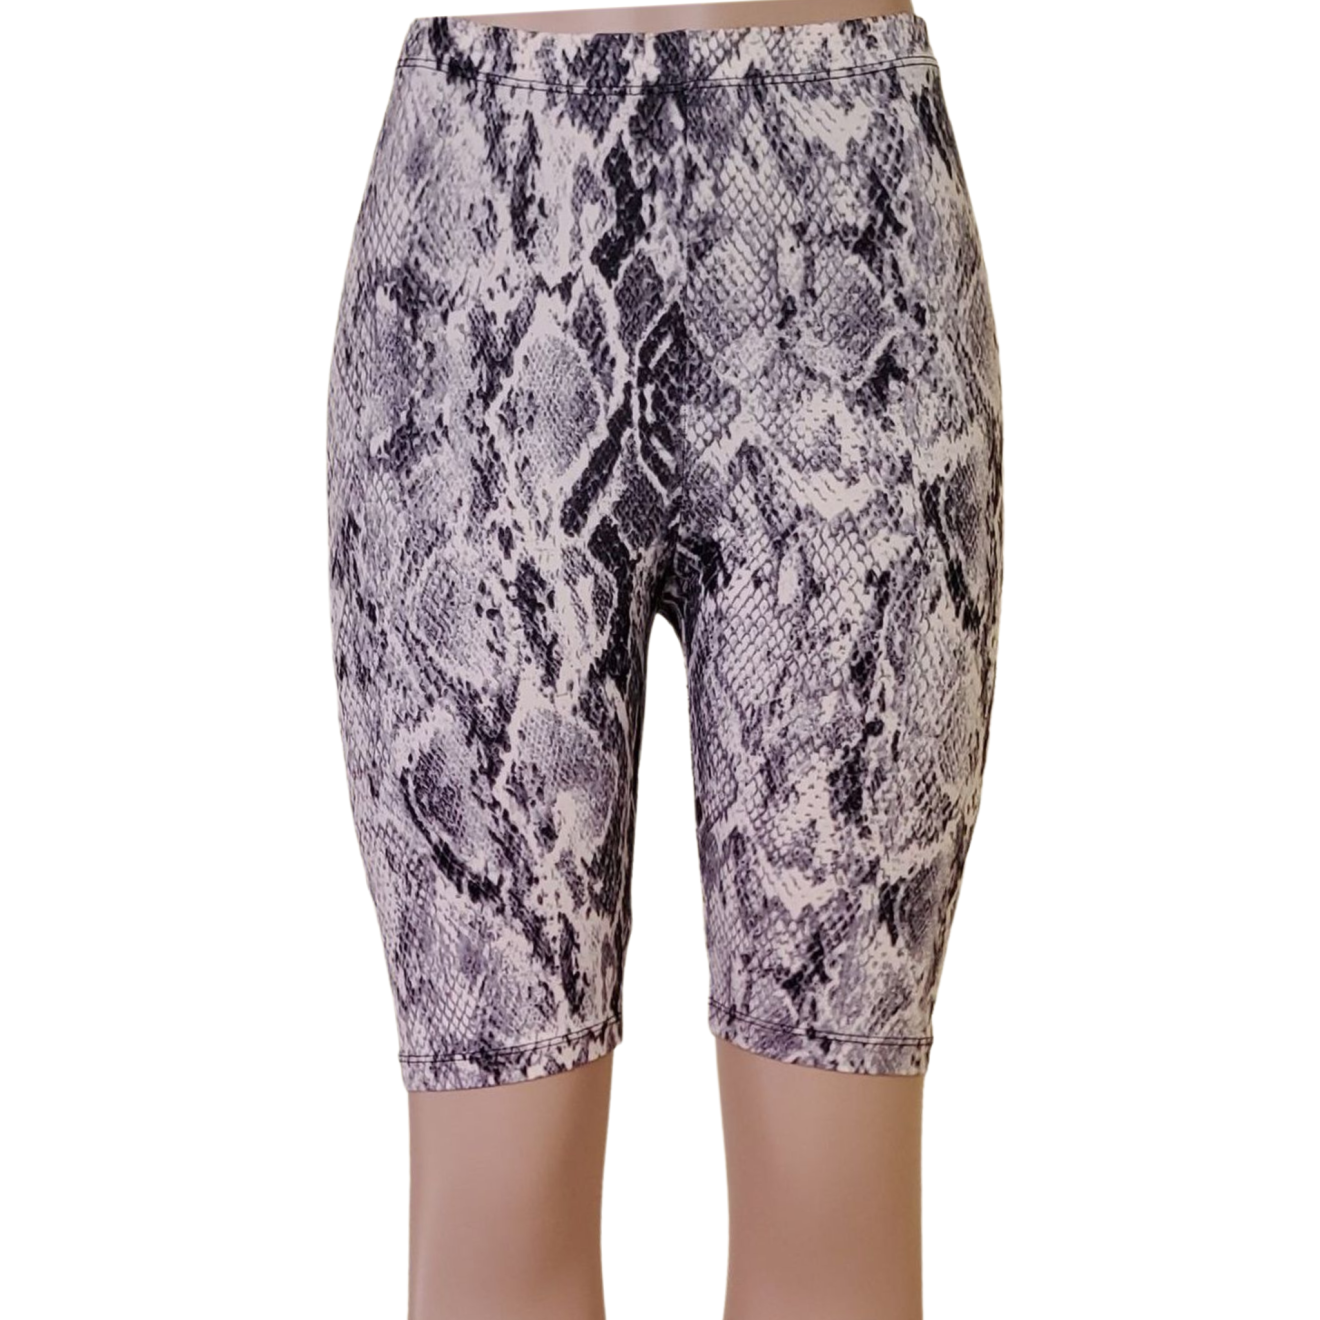 Women's snake print biker shorts in black and white, trendy and stylish for casual or active wear.